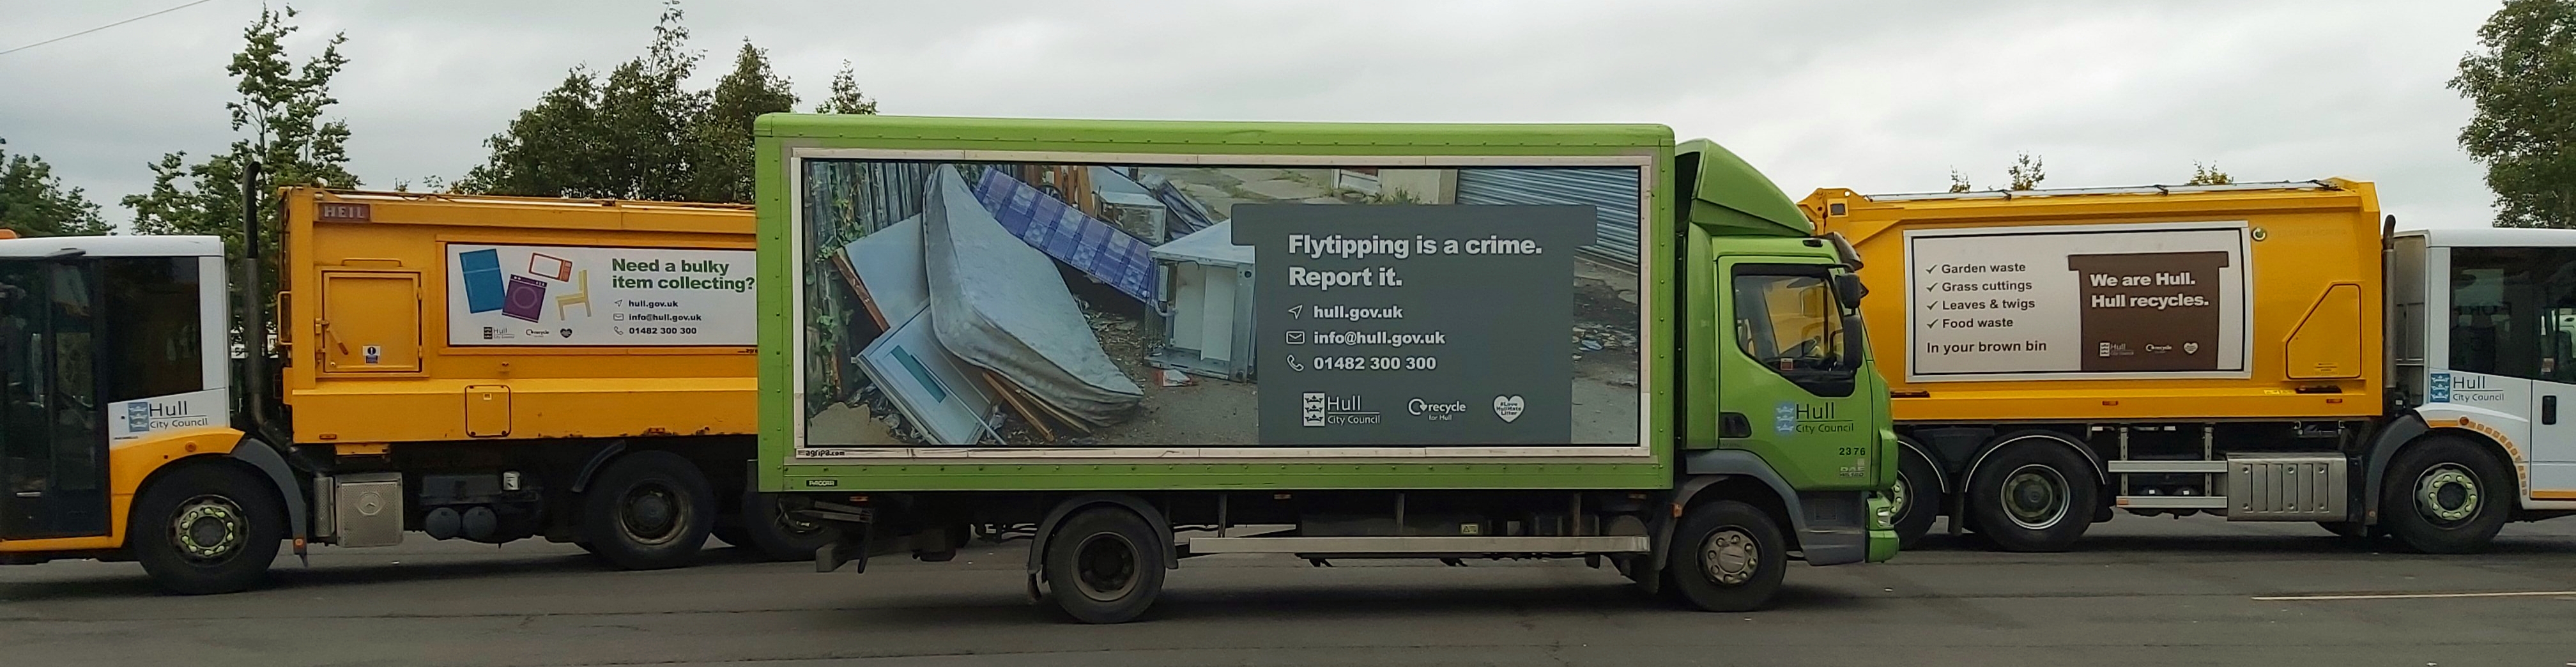 An image of two Bin lorries either side of a van used to collect Bulky Items